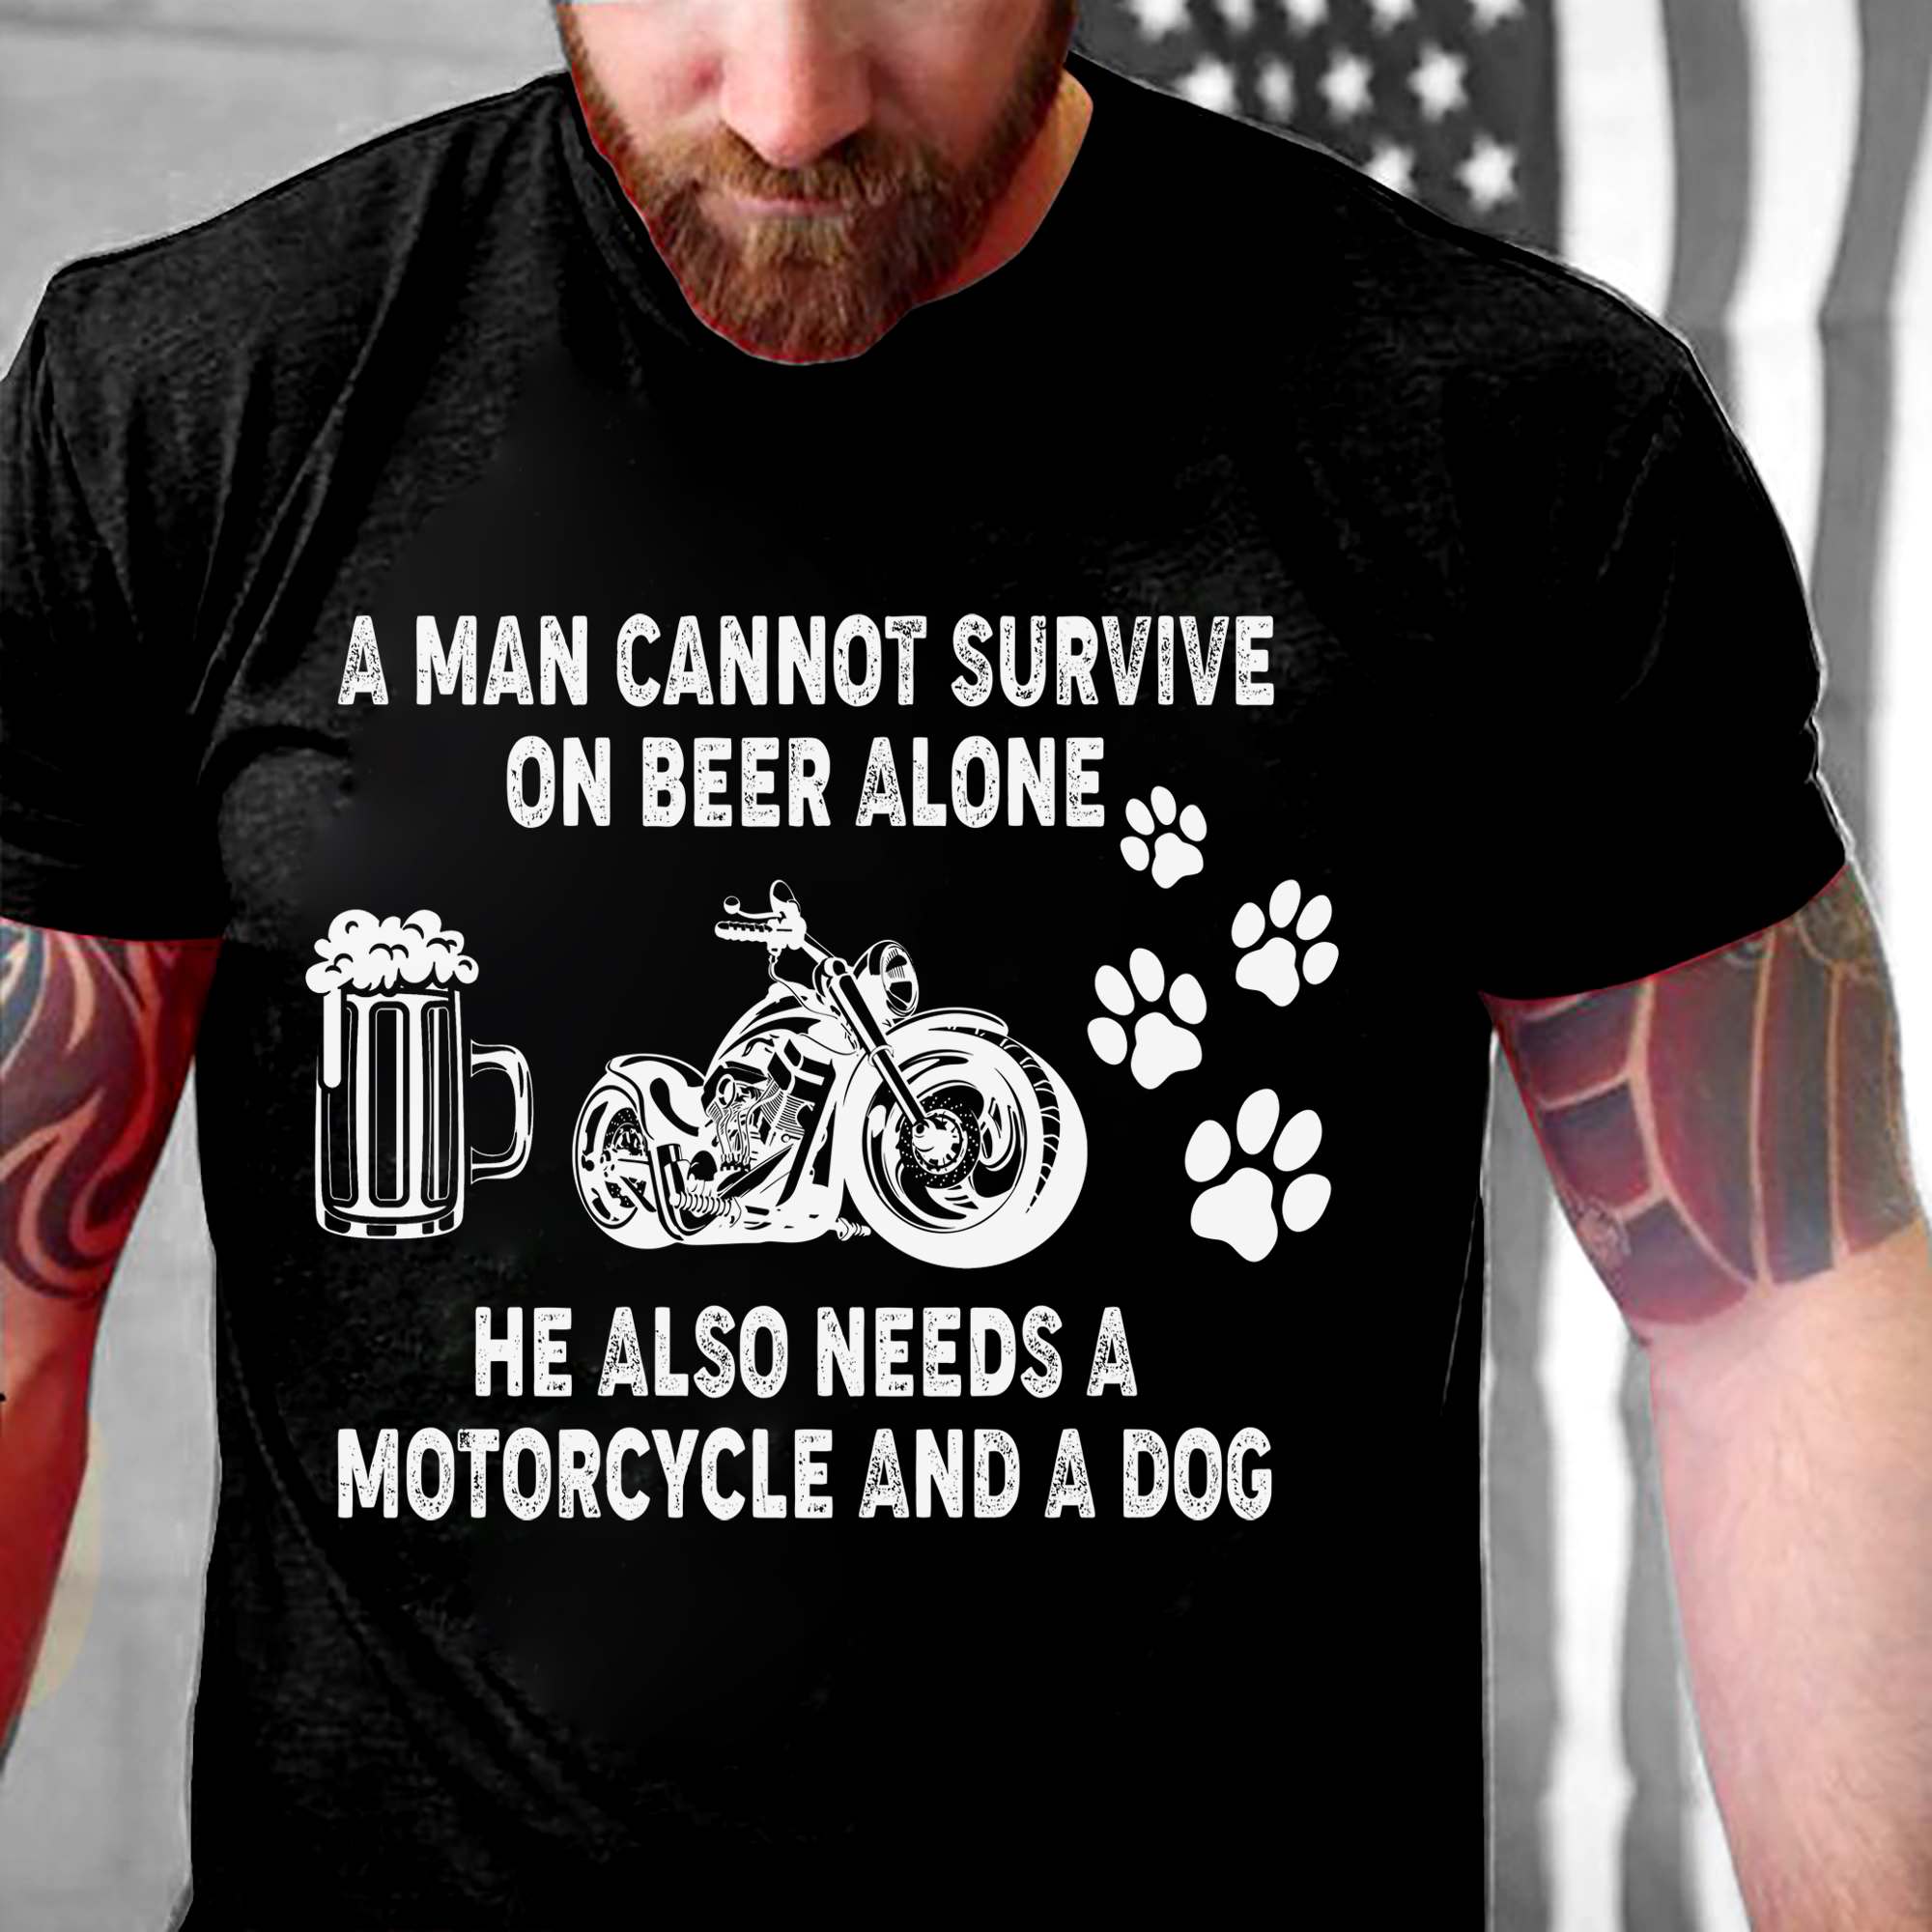 Beer Motorcycle Dog - A man cannot survive on beer alone he also needs a motorcycle and a dog